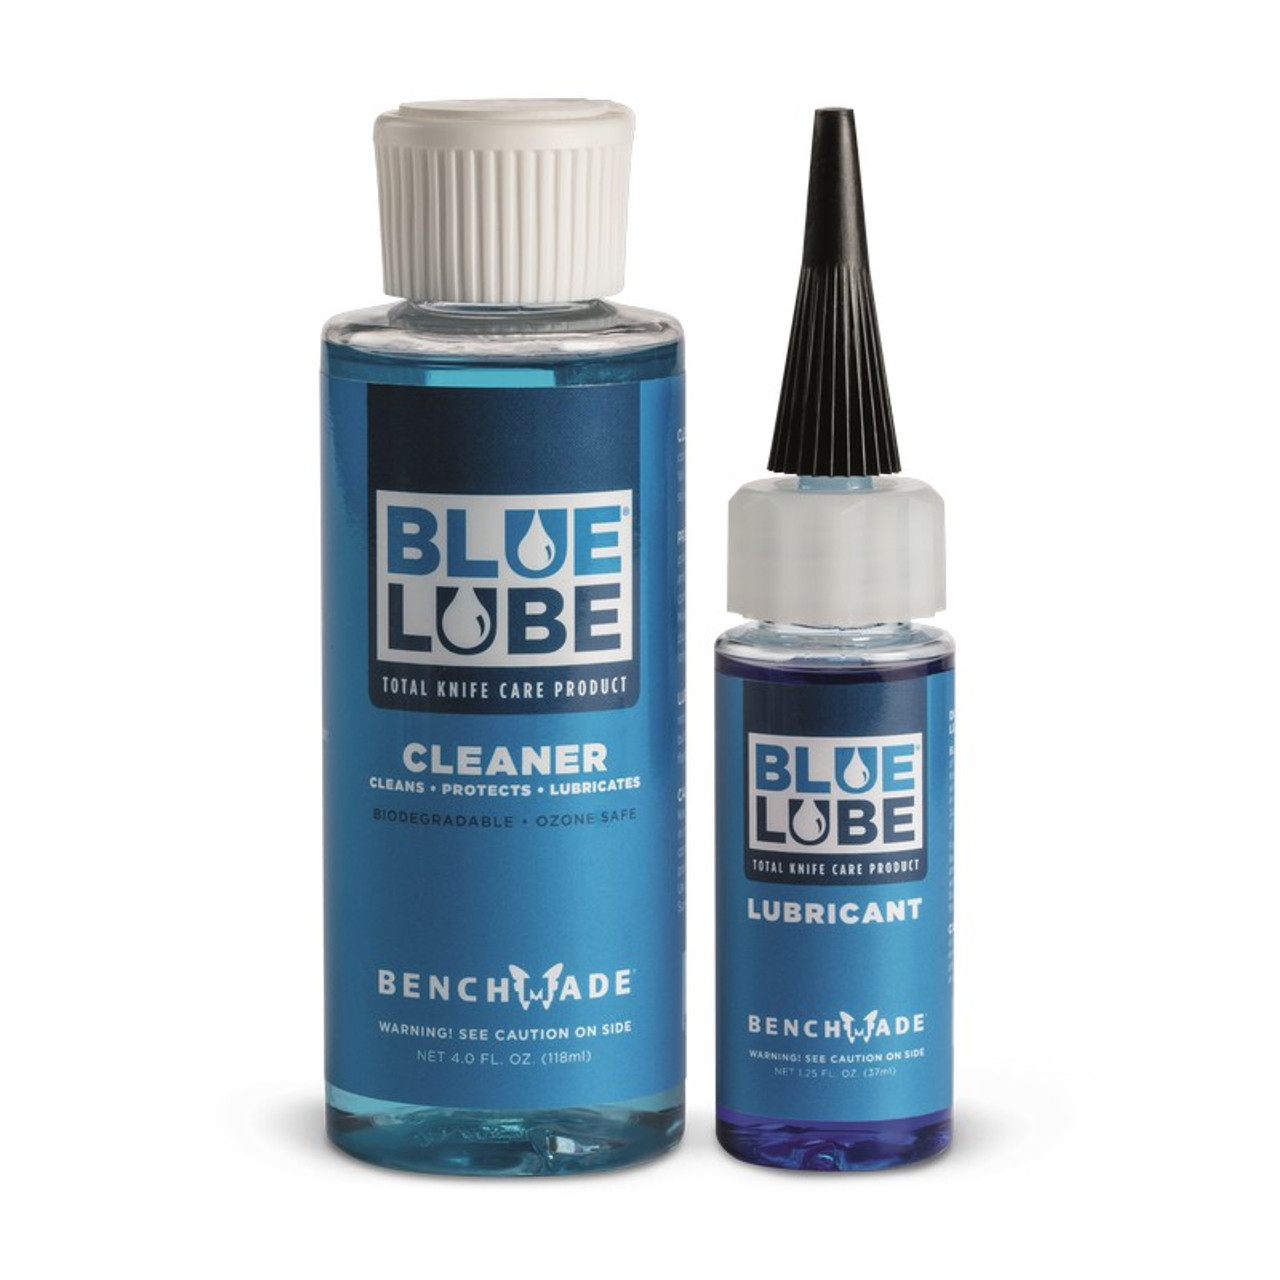 Reviews and Ratings for Benchmade BlueLube Lubricant 1.25 oz